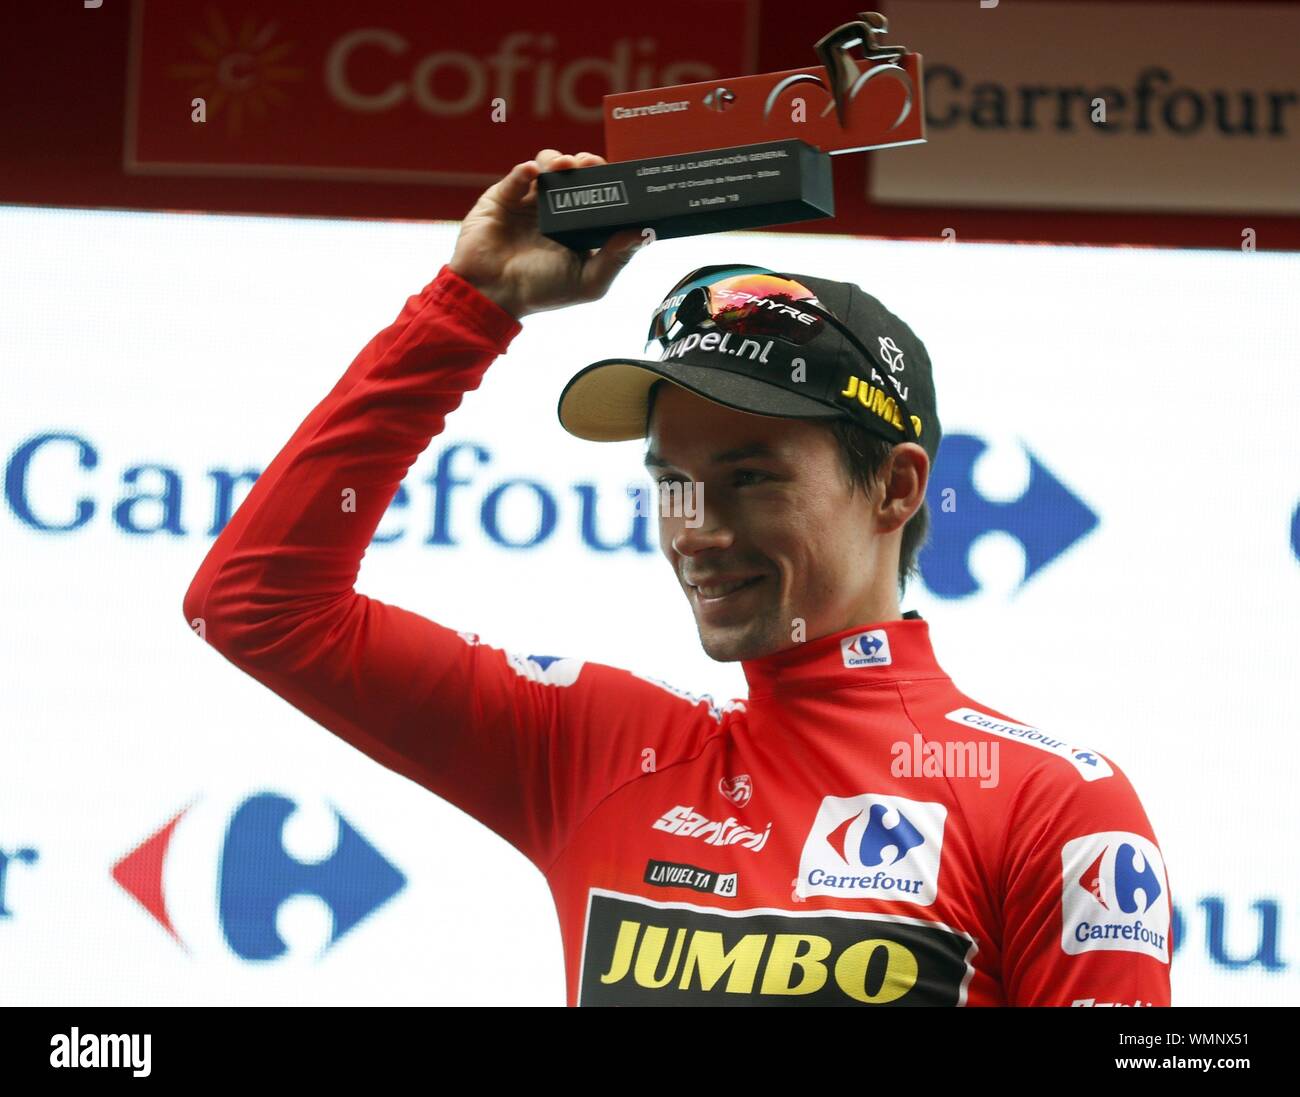 Bilbao, Spain. 05th Sep, 2019. Slovenian rider Primoz Roglic of Team  Jumbo-Visma celebrates on the podium with the overall leader's red jersey  after the 12th stage of the Vuelta a Espana cycling